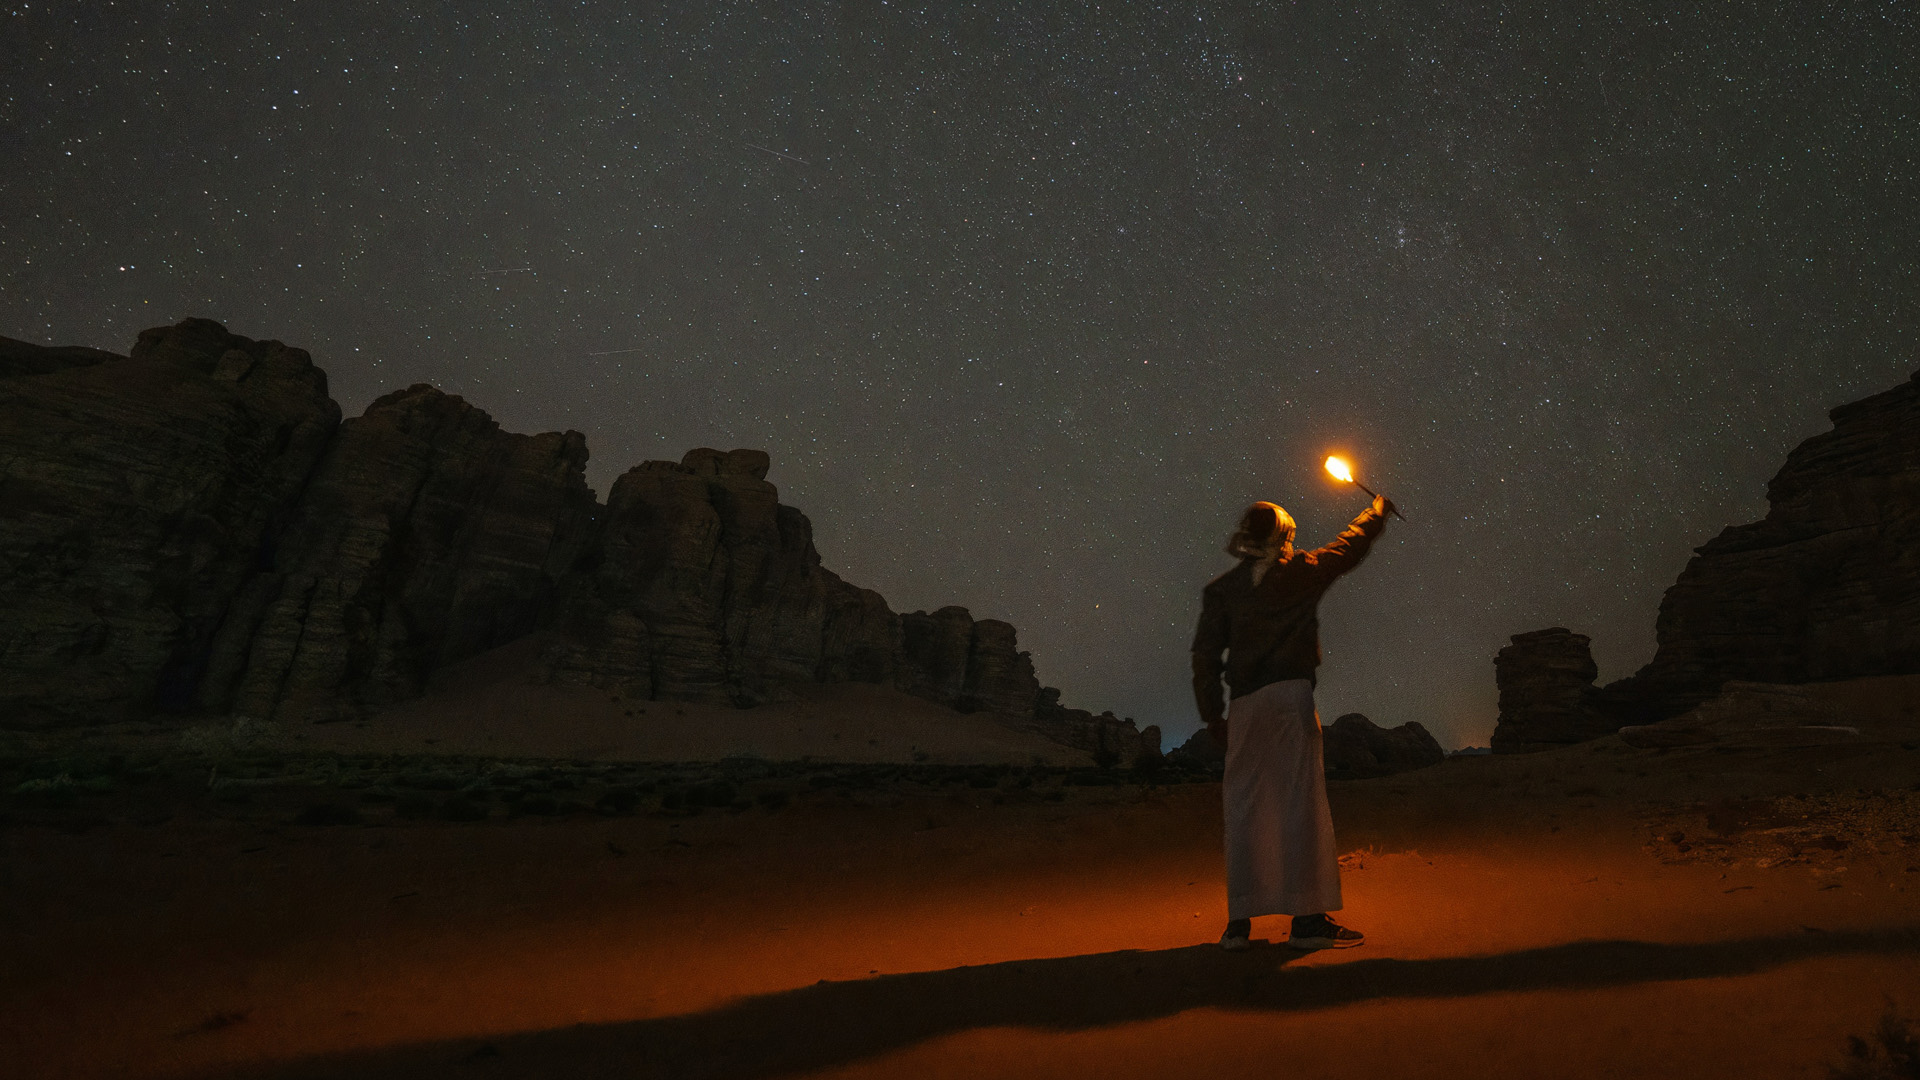 A person in NEOM lighting in the night